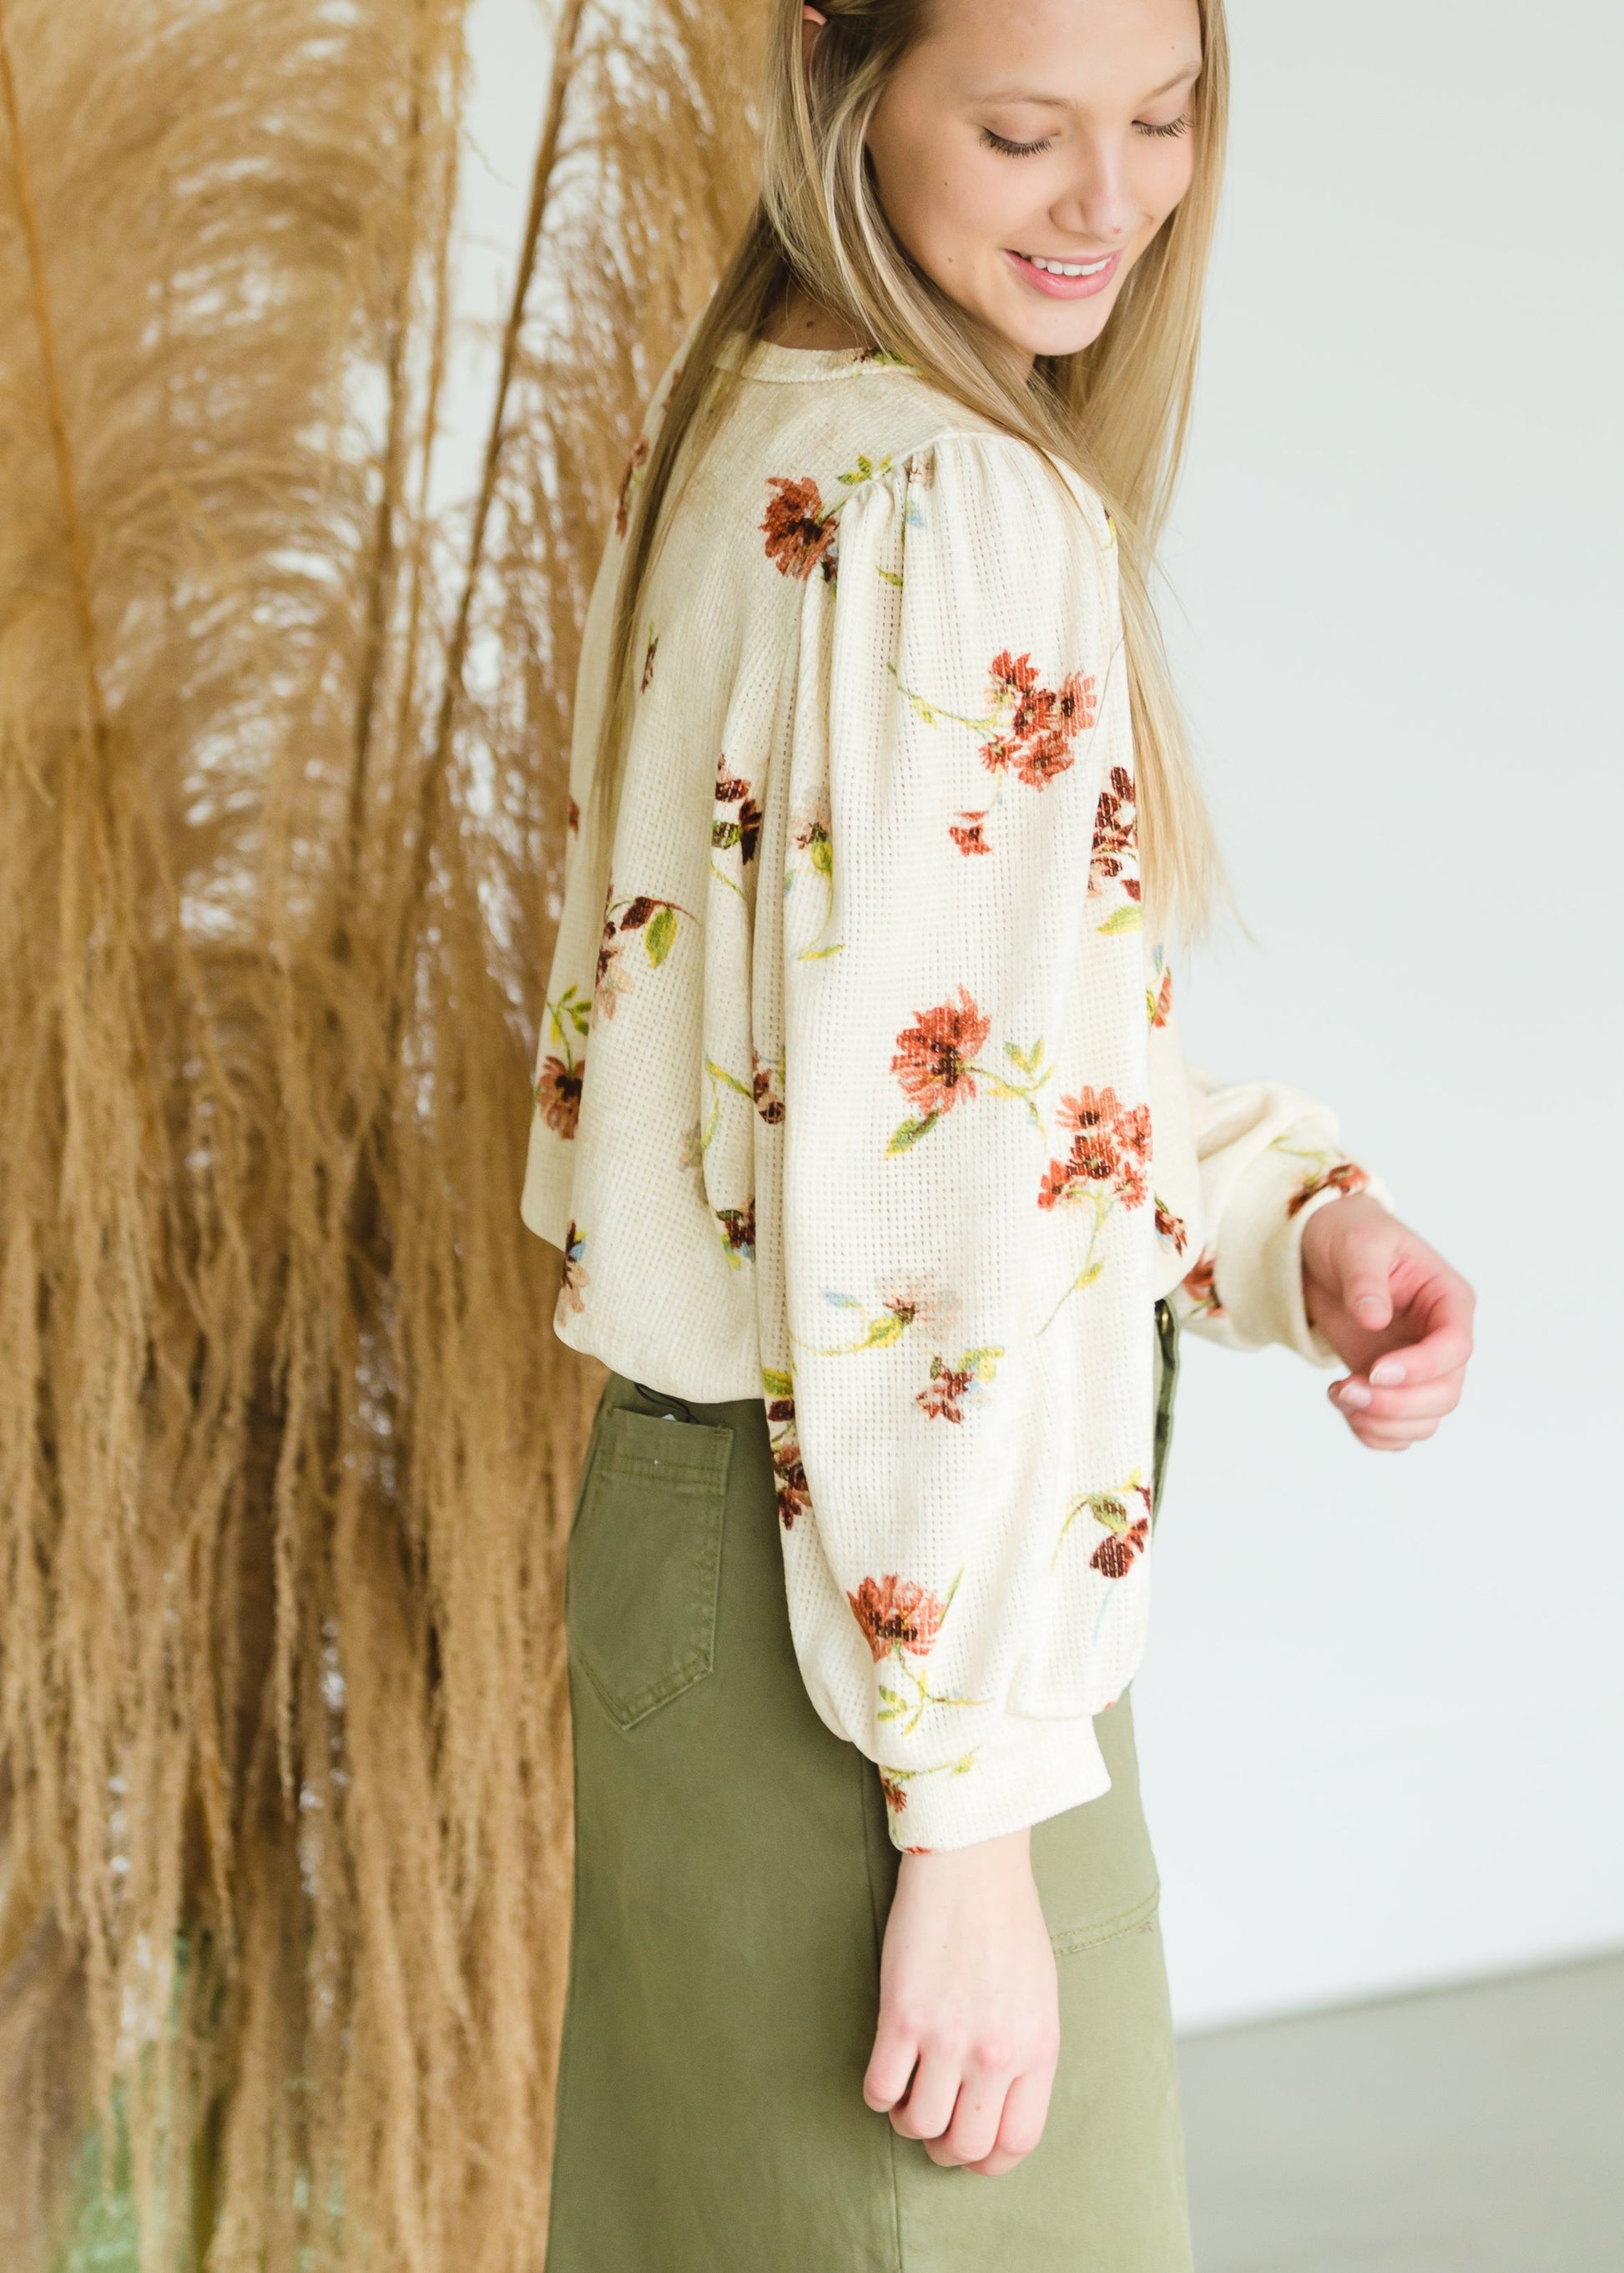 Cream Waffle Textured Floral Top - FINAL SALE Tops